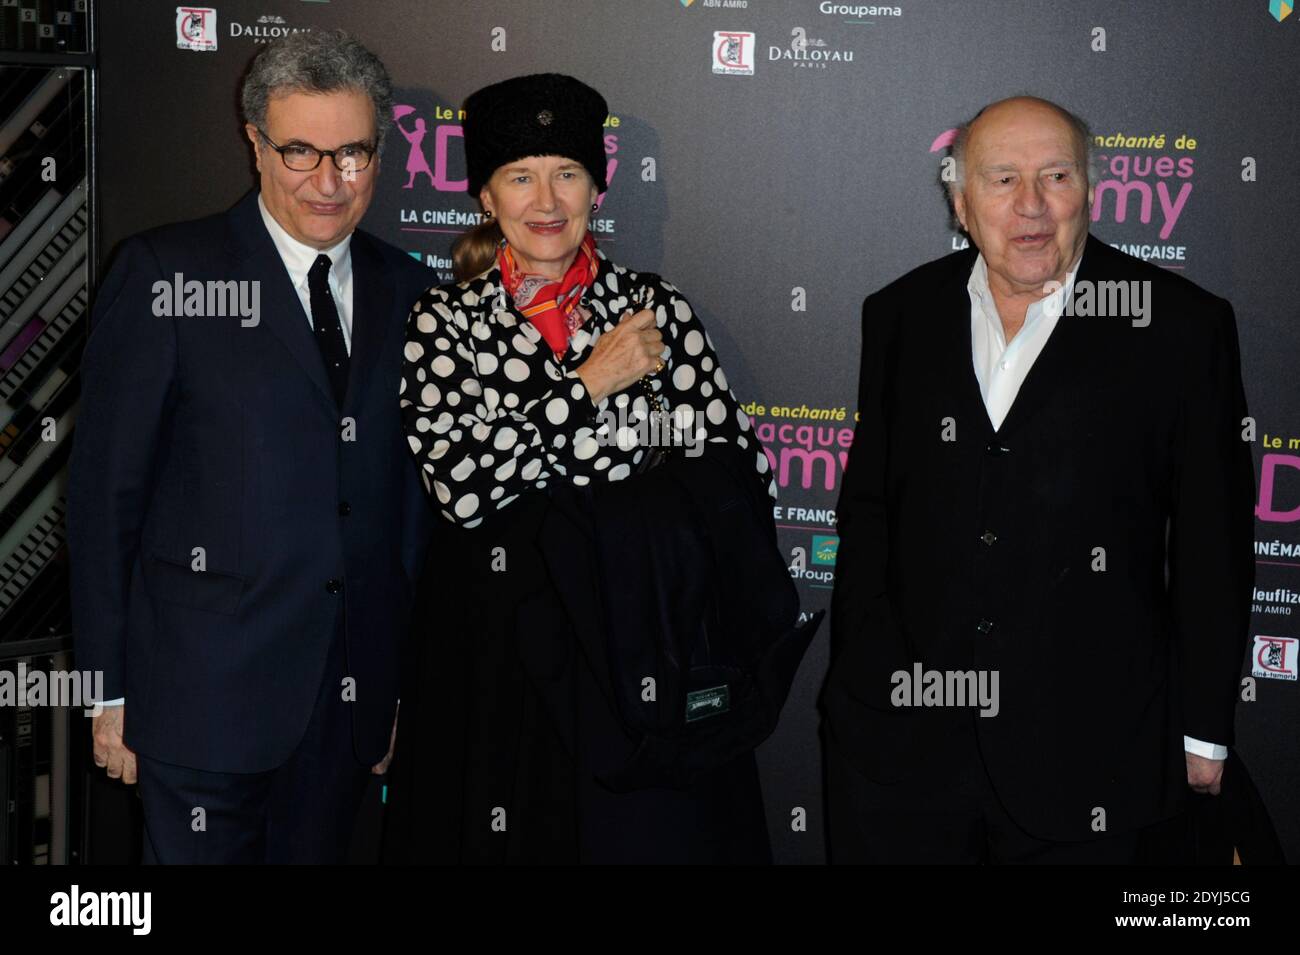 Serge Tubiana, Dominique Sanda, Michel Piccoli attending the 'Le Monde Enchante de Jacques Demy' exhibition opening at the french Cinematheque in Paris, France on April 08, 2013. Photo by Aurore Marechal/ABACAPRESS.COM Stock Photo